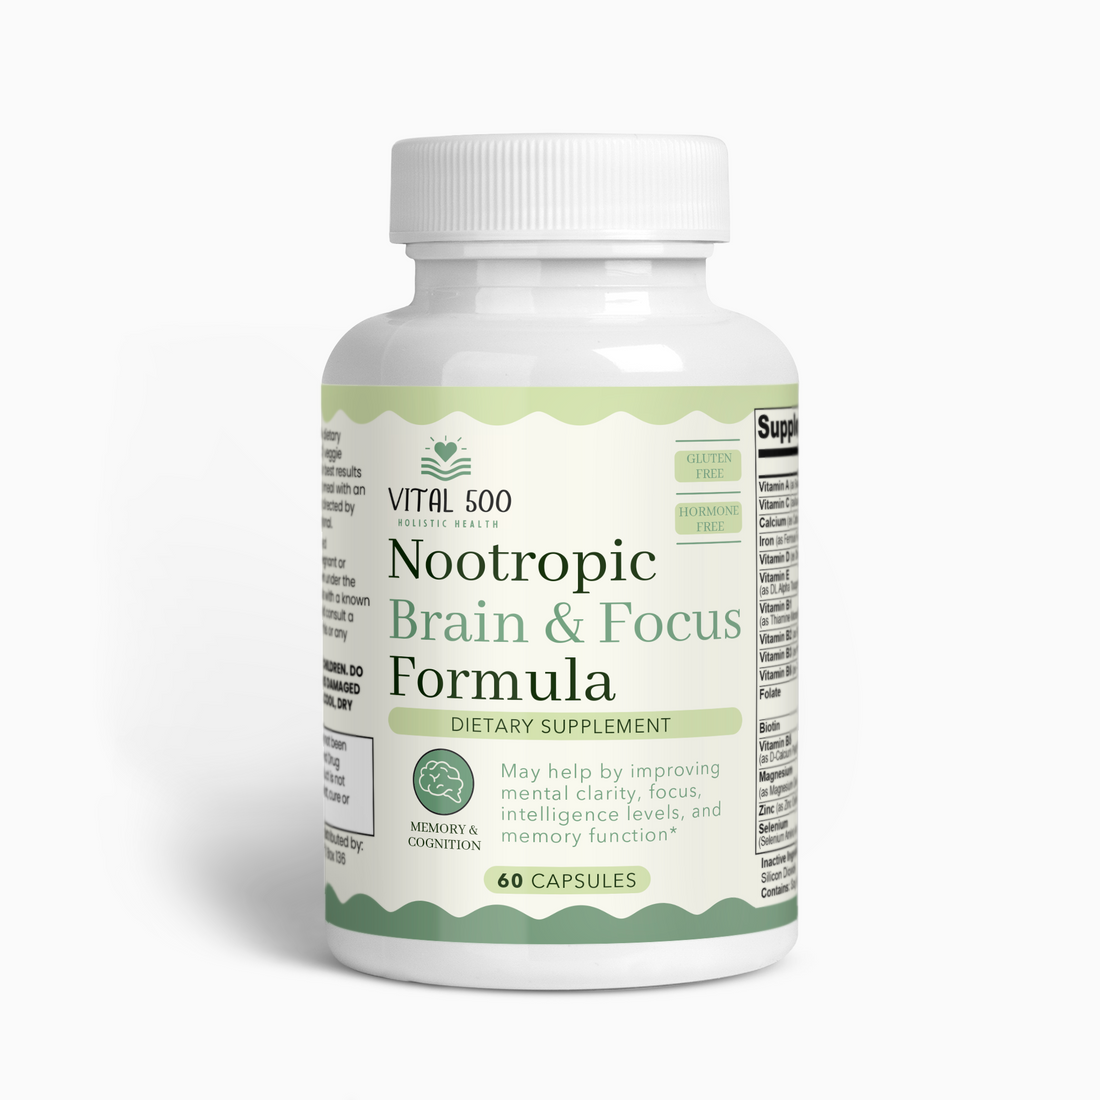 Boost Your Brainpower Naturally: The Benefits of Nootropic Brain & Focus Formula